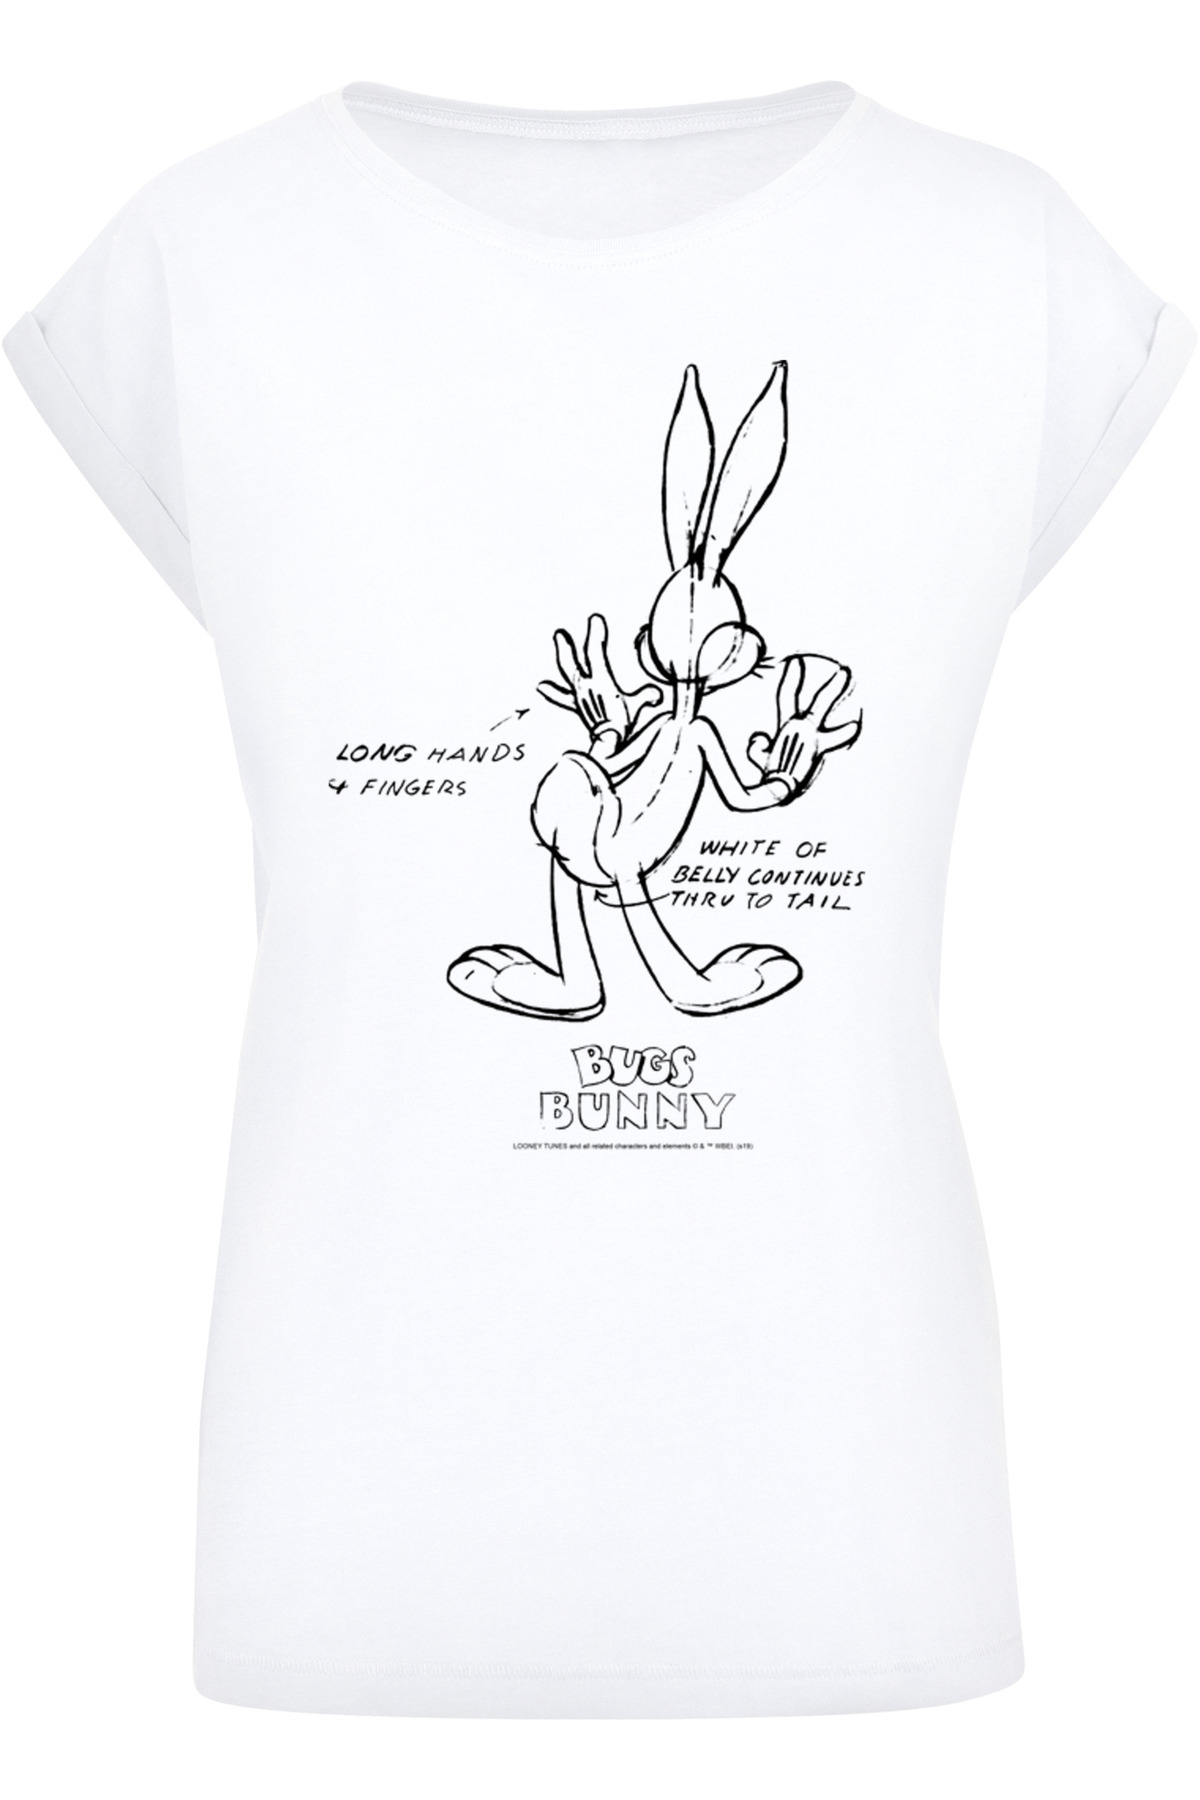 Shoulder Ladies Damen Tunes Looney Belly-WHT Extended Bunny - Trendyol F4NT4STIC Bugs T-Shirt White mit